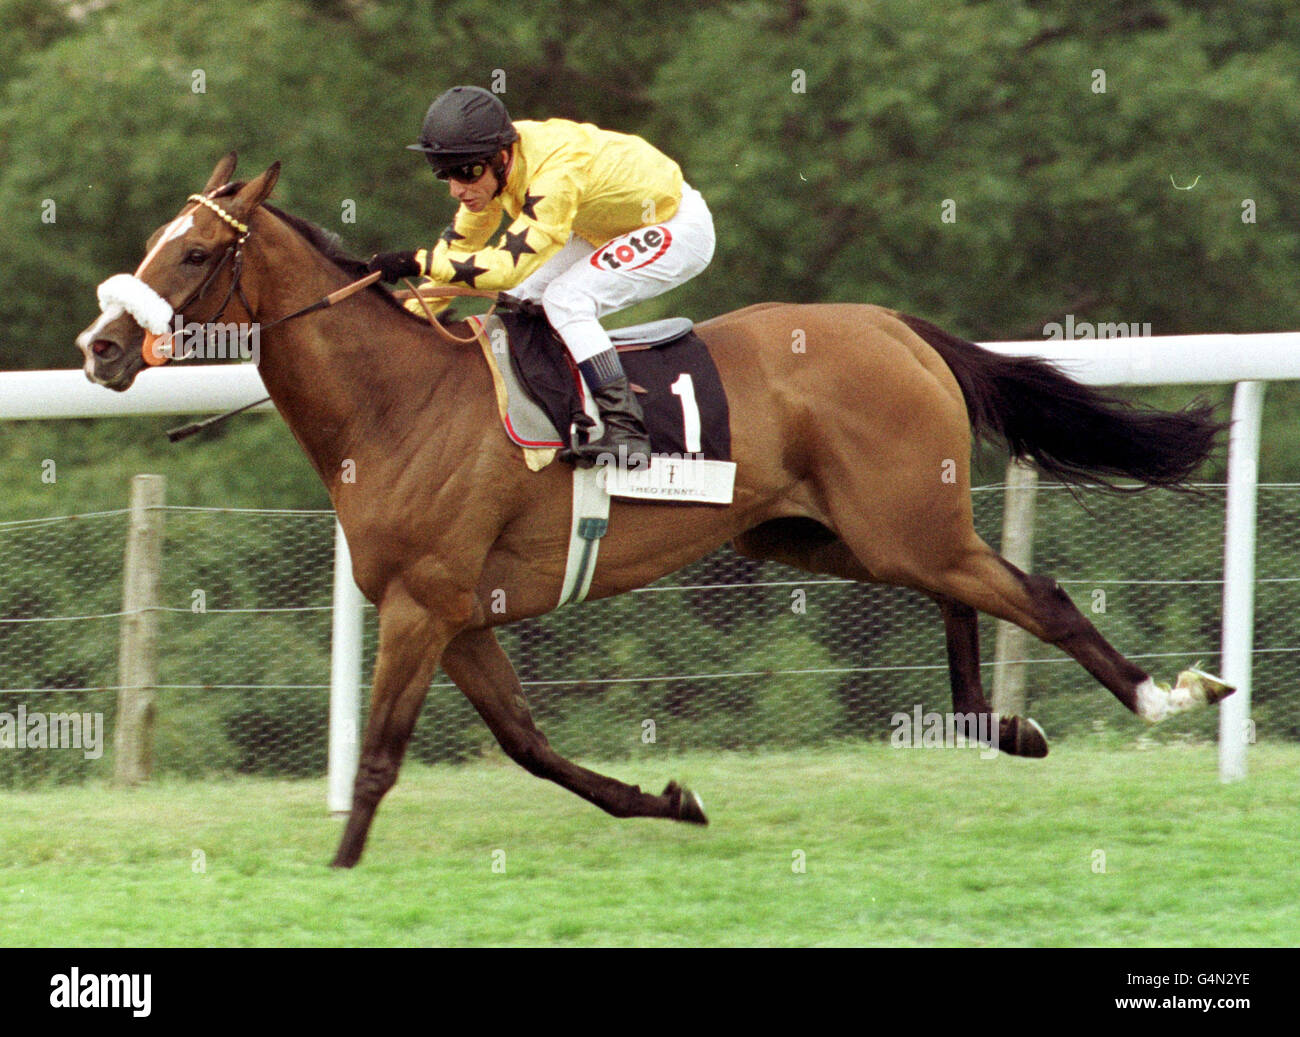 Racing/Goodwood. Gary Stevens on Danish Rhapsody on his way to winning the Theo Fennell Glorious Rated Stakes at Goodwood. Stock Photo